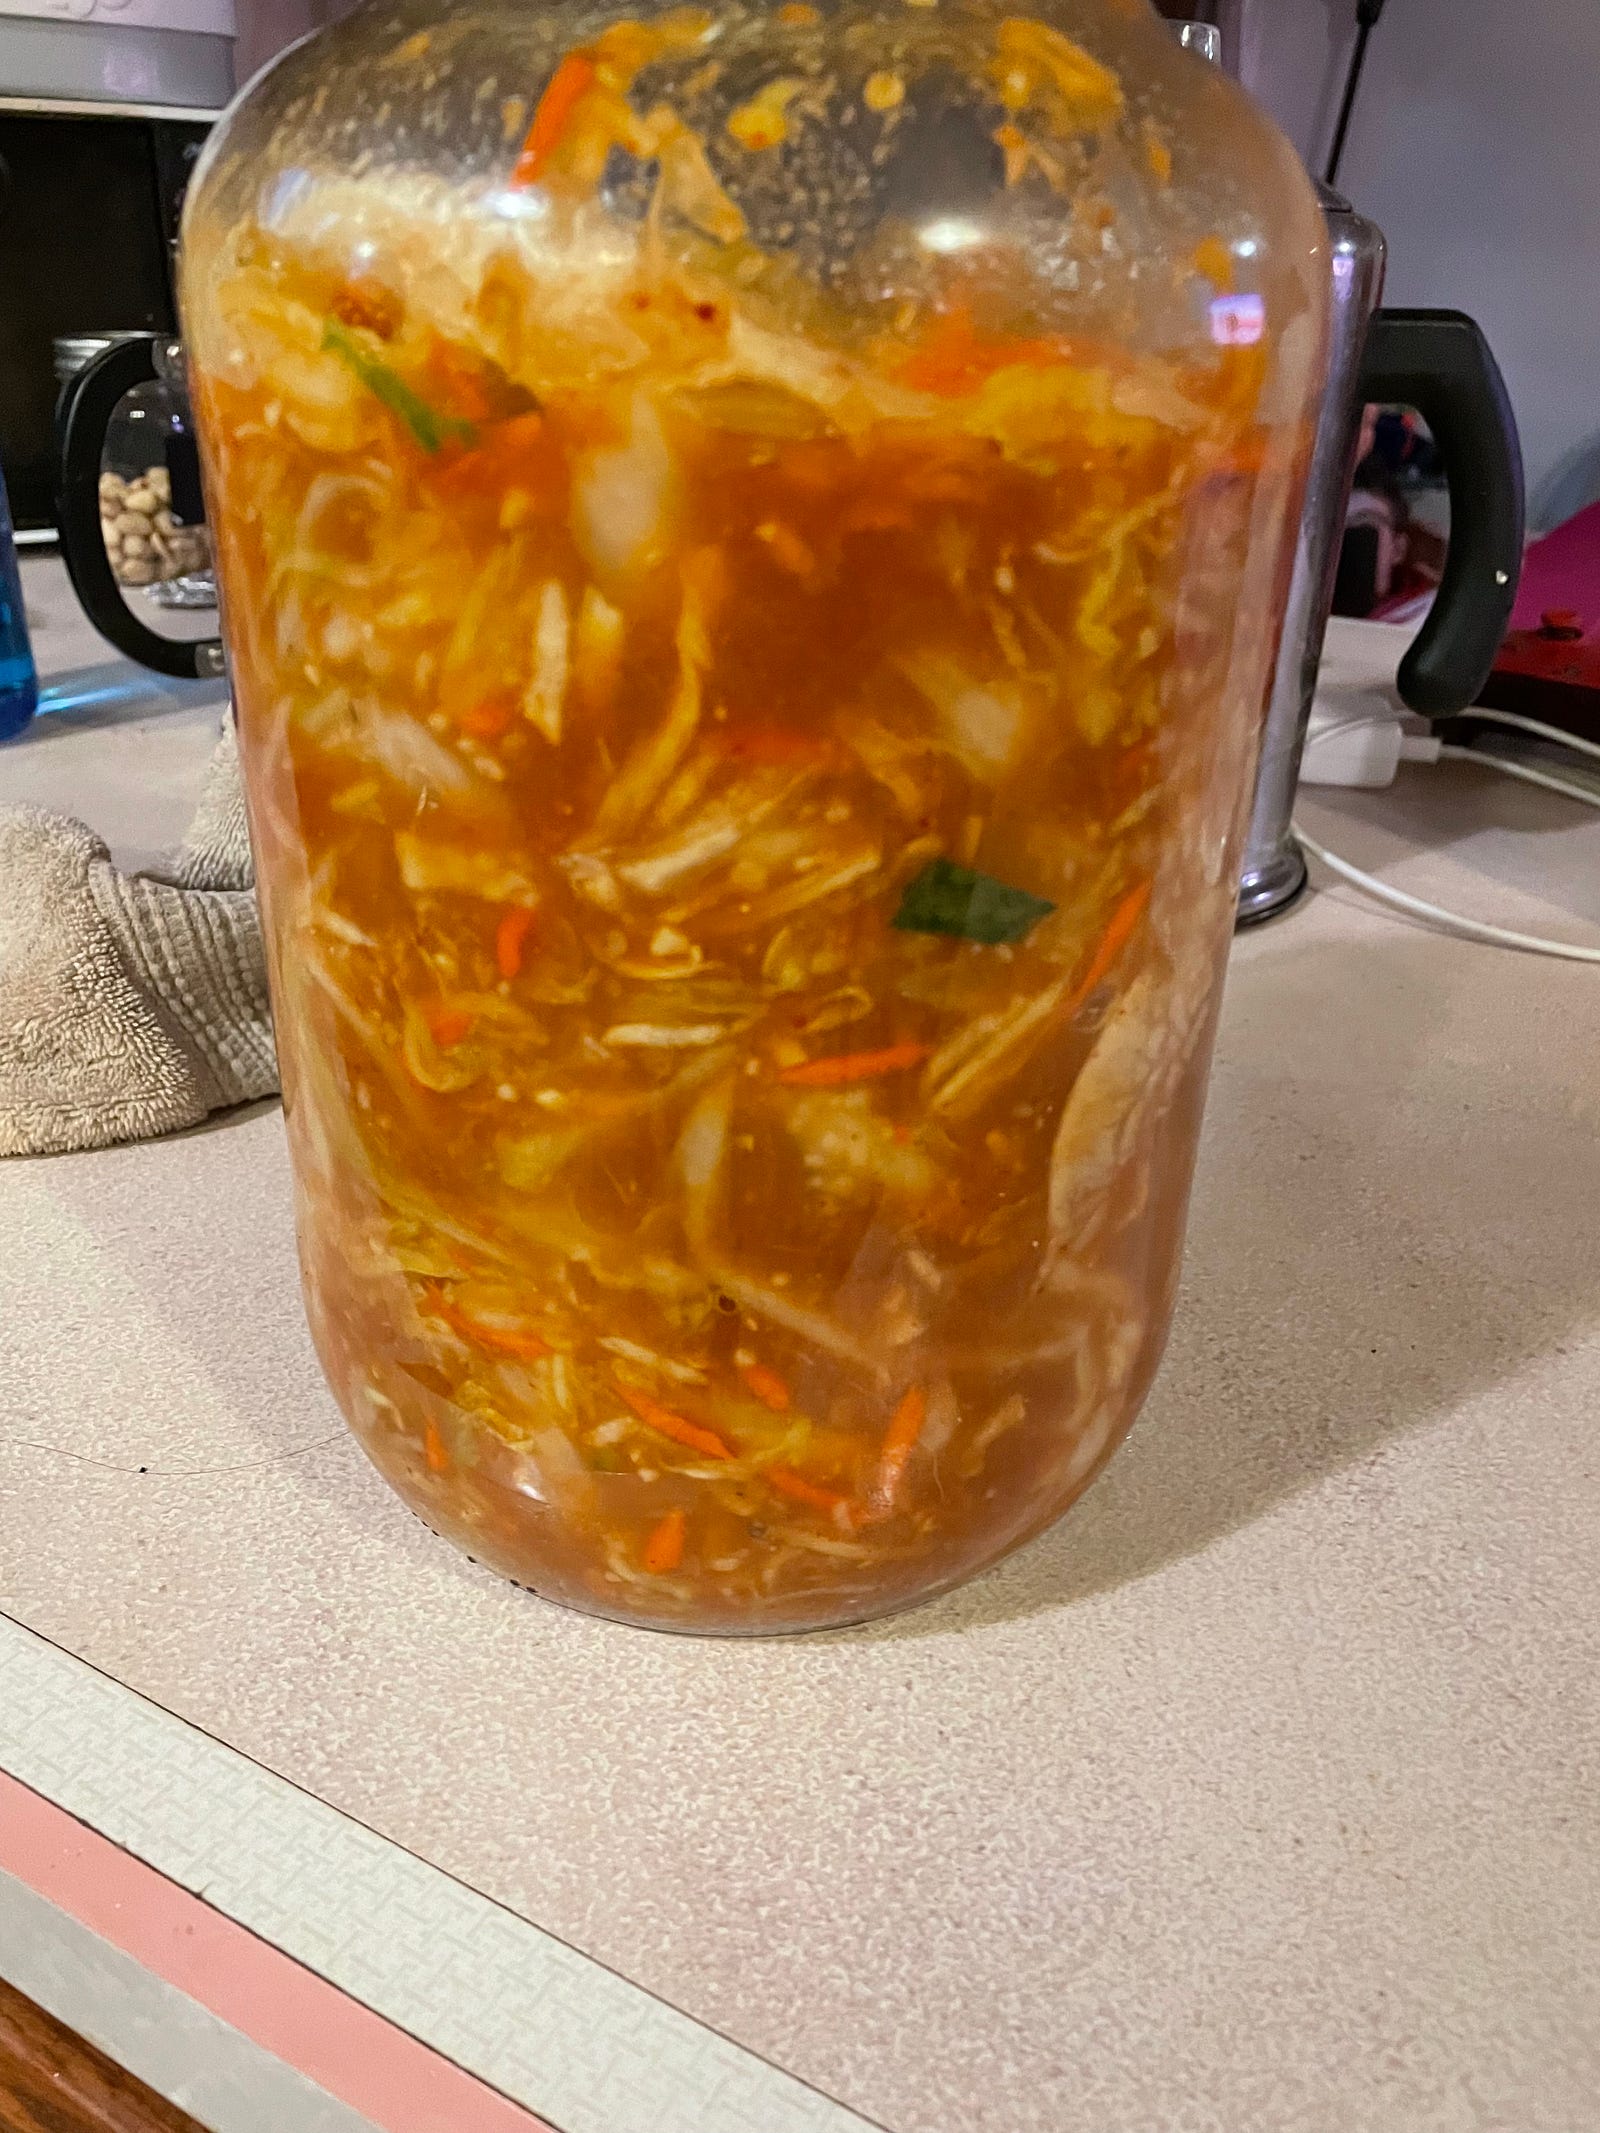 A gallon size pickle jar filled with kimchi sitting on the kitchen counter.